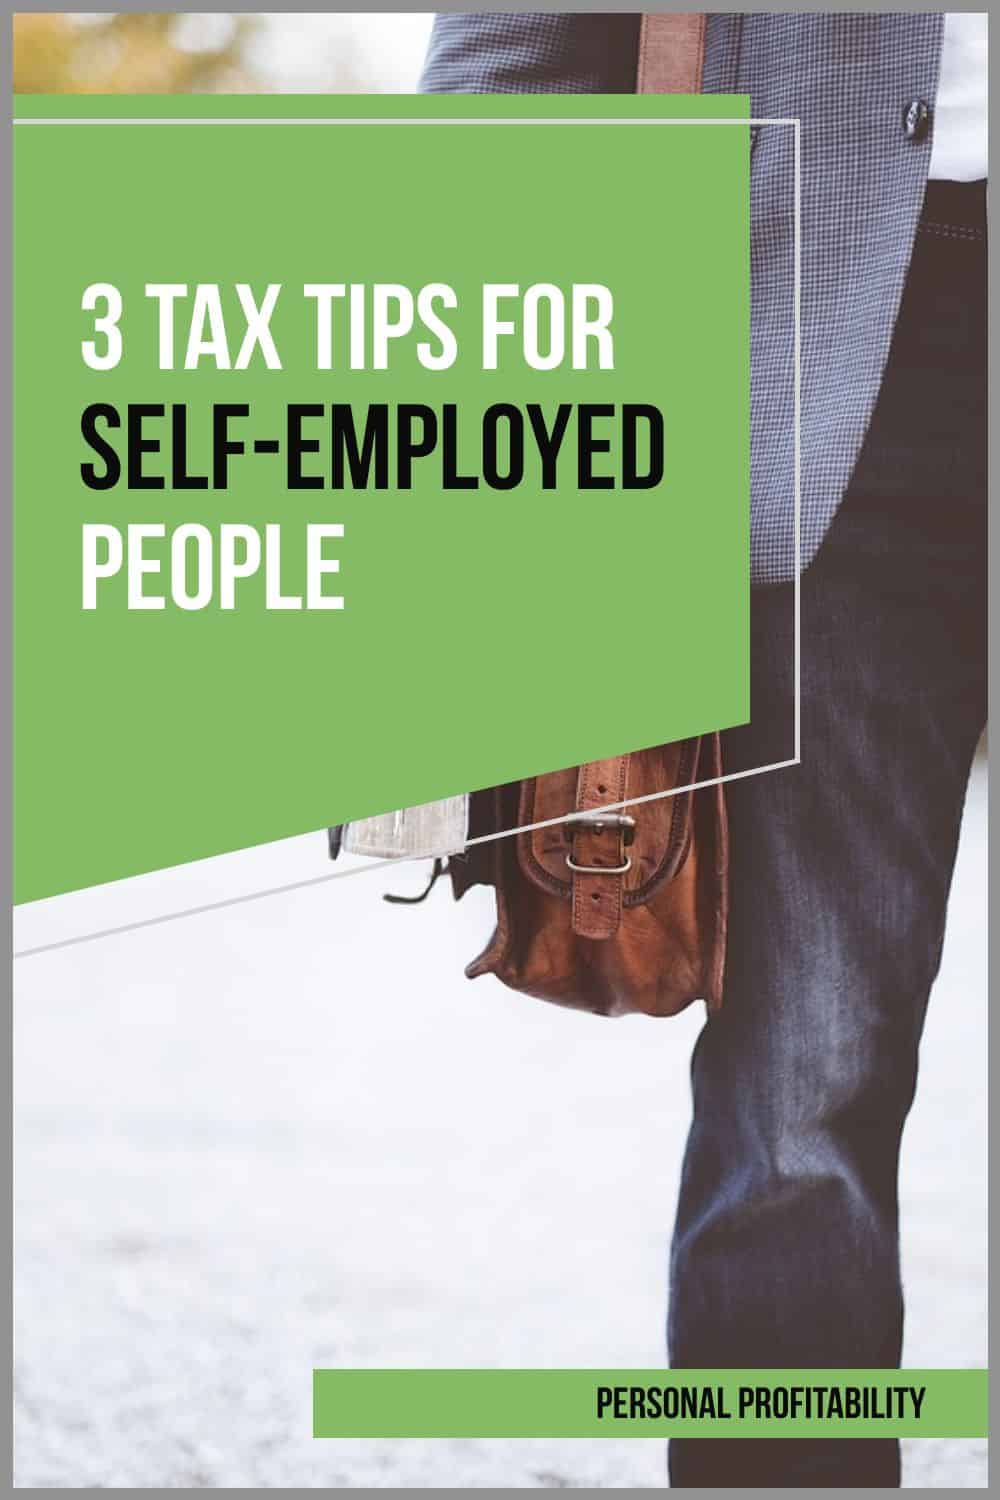 3 Simple Tax Tips for Self-Employed People